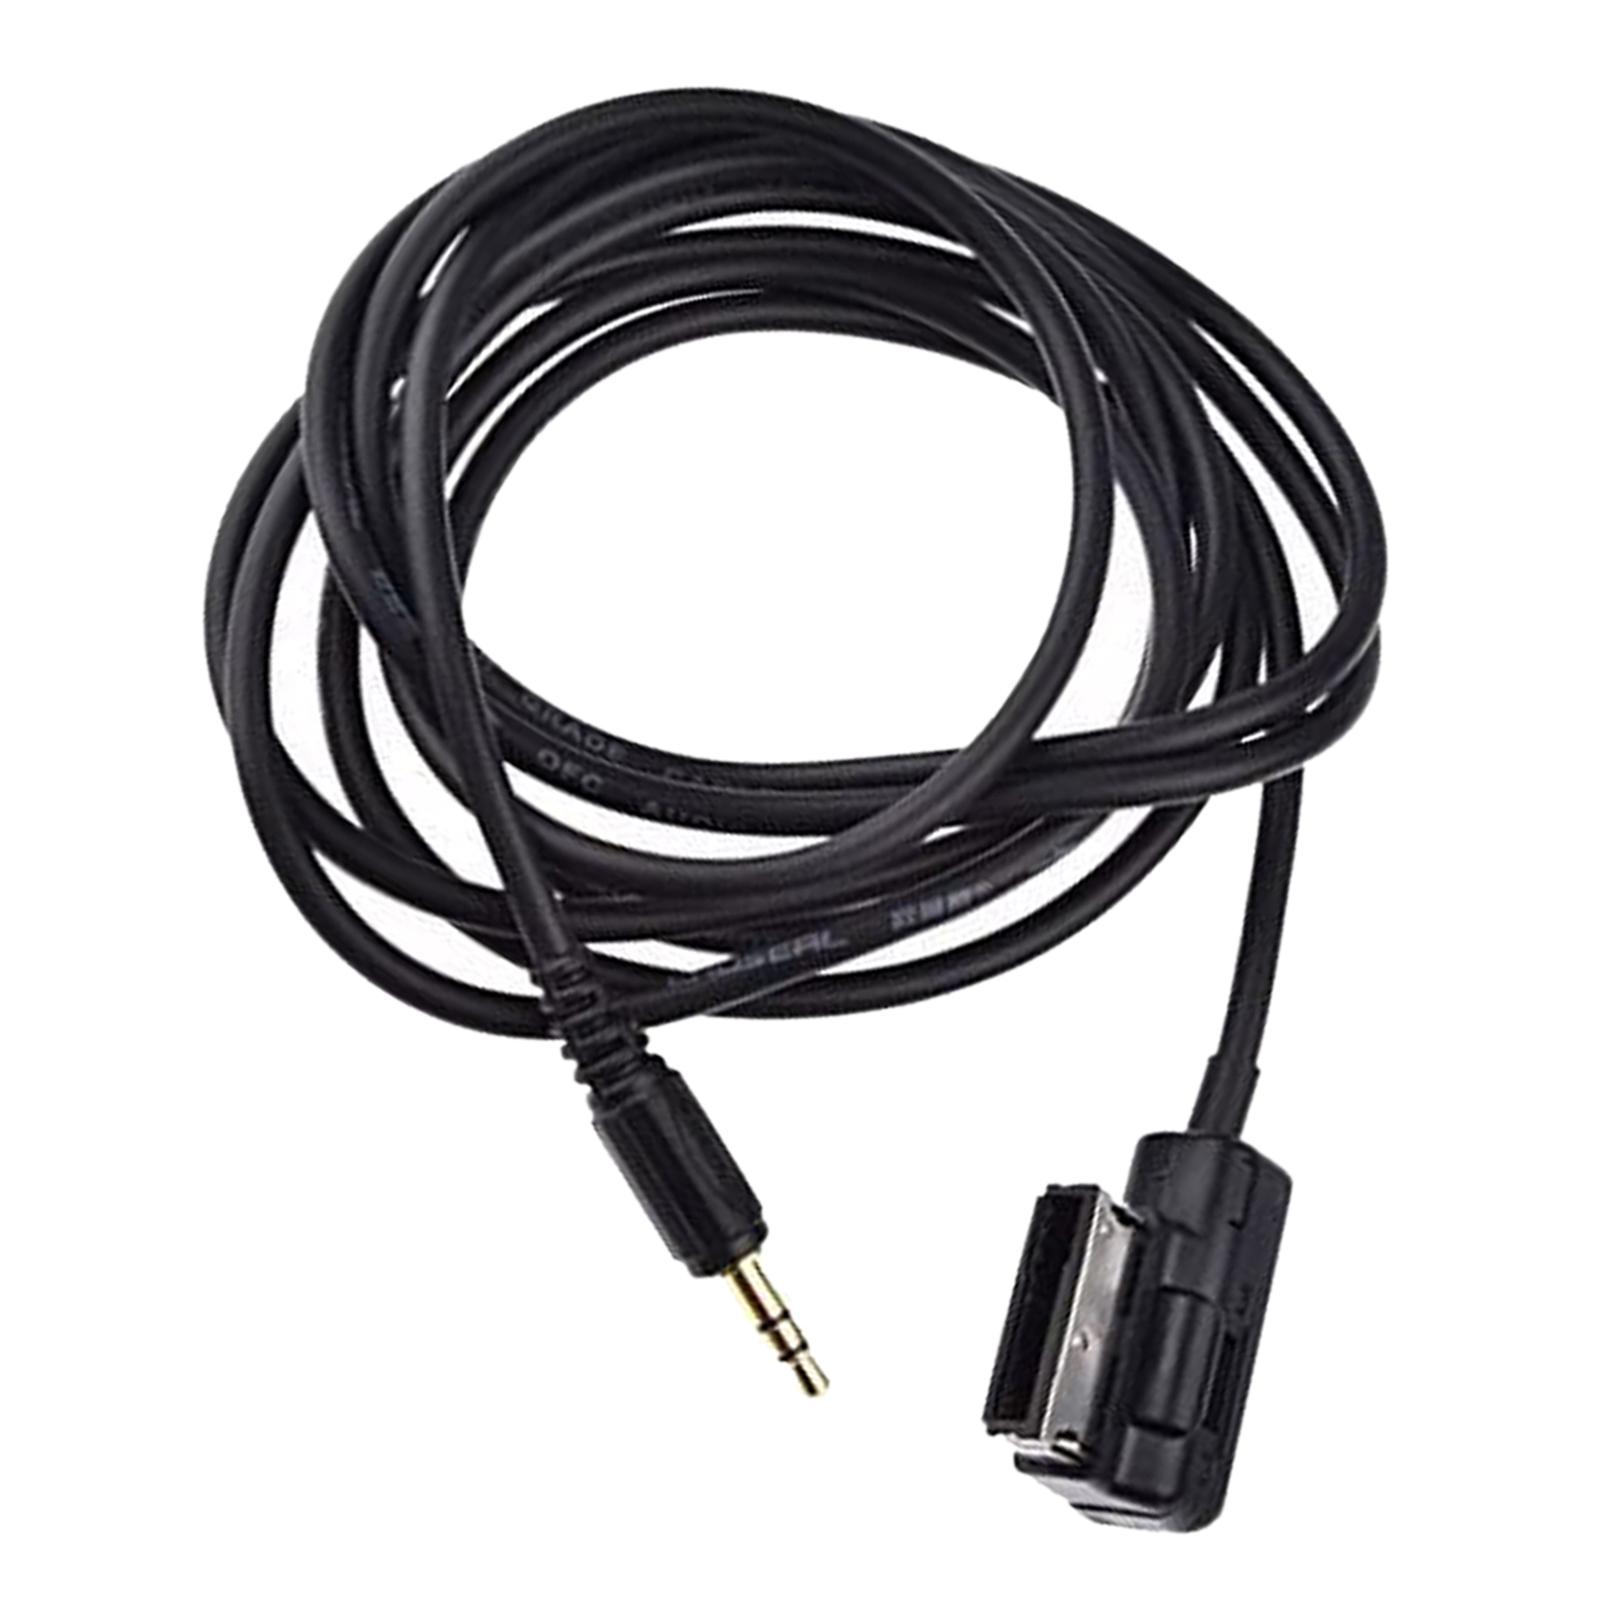 Music Interface AMI AUX 3.5mm Jack AUX in MP3 Adapter Cable 2M for